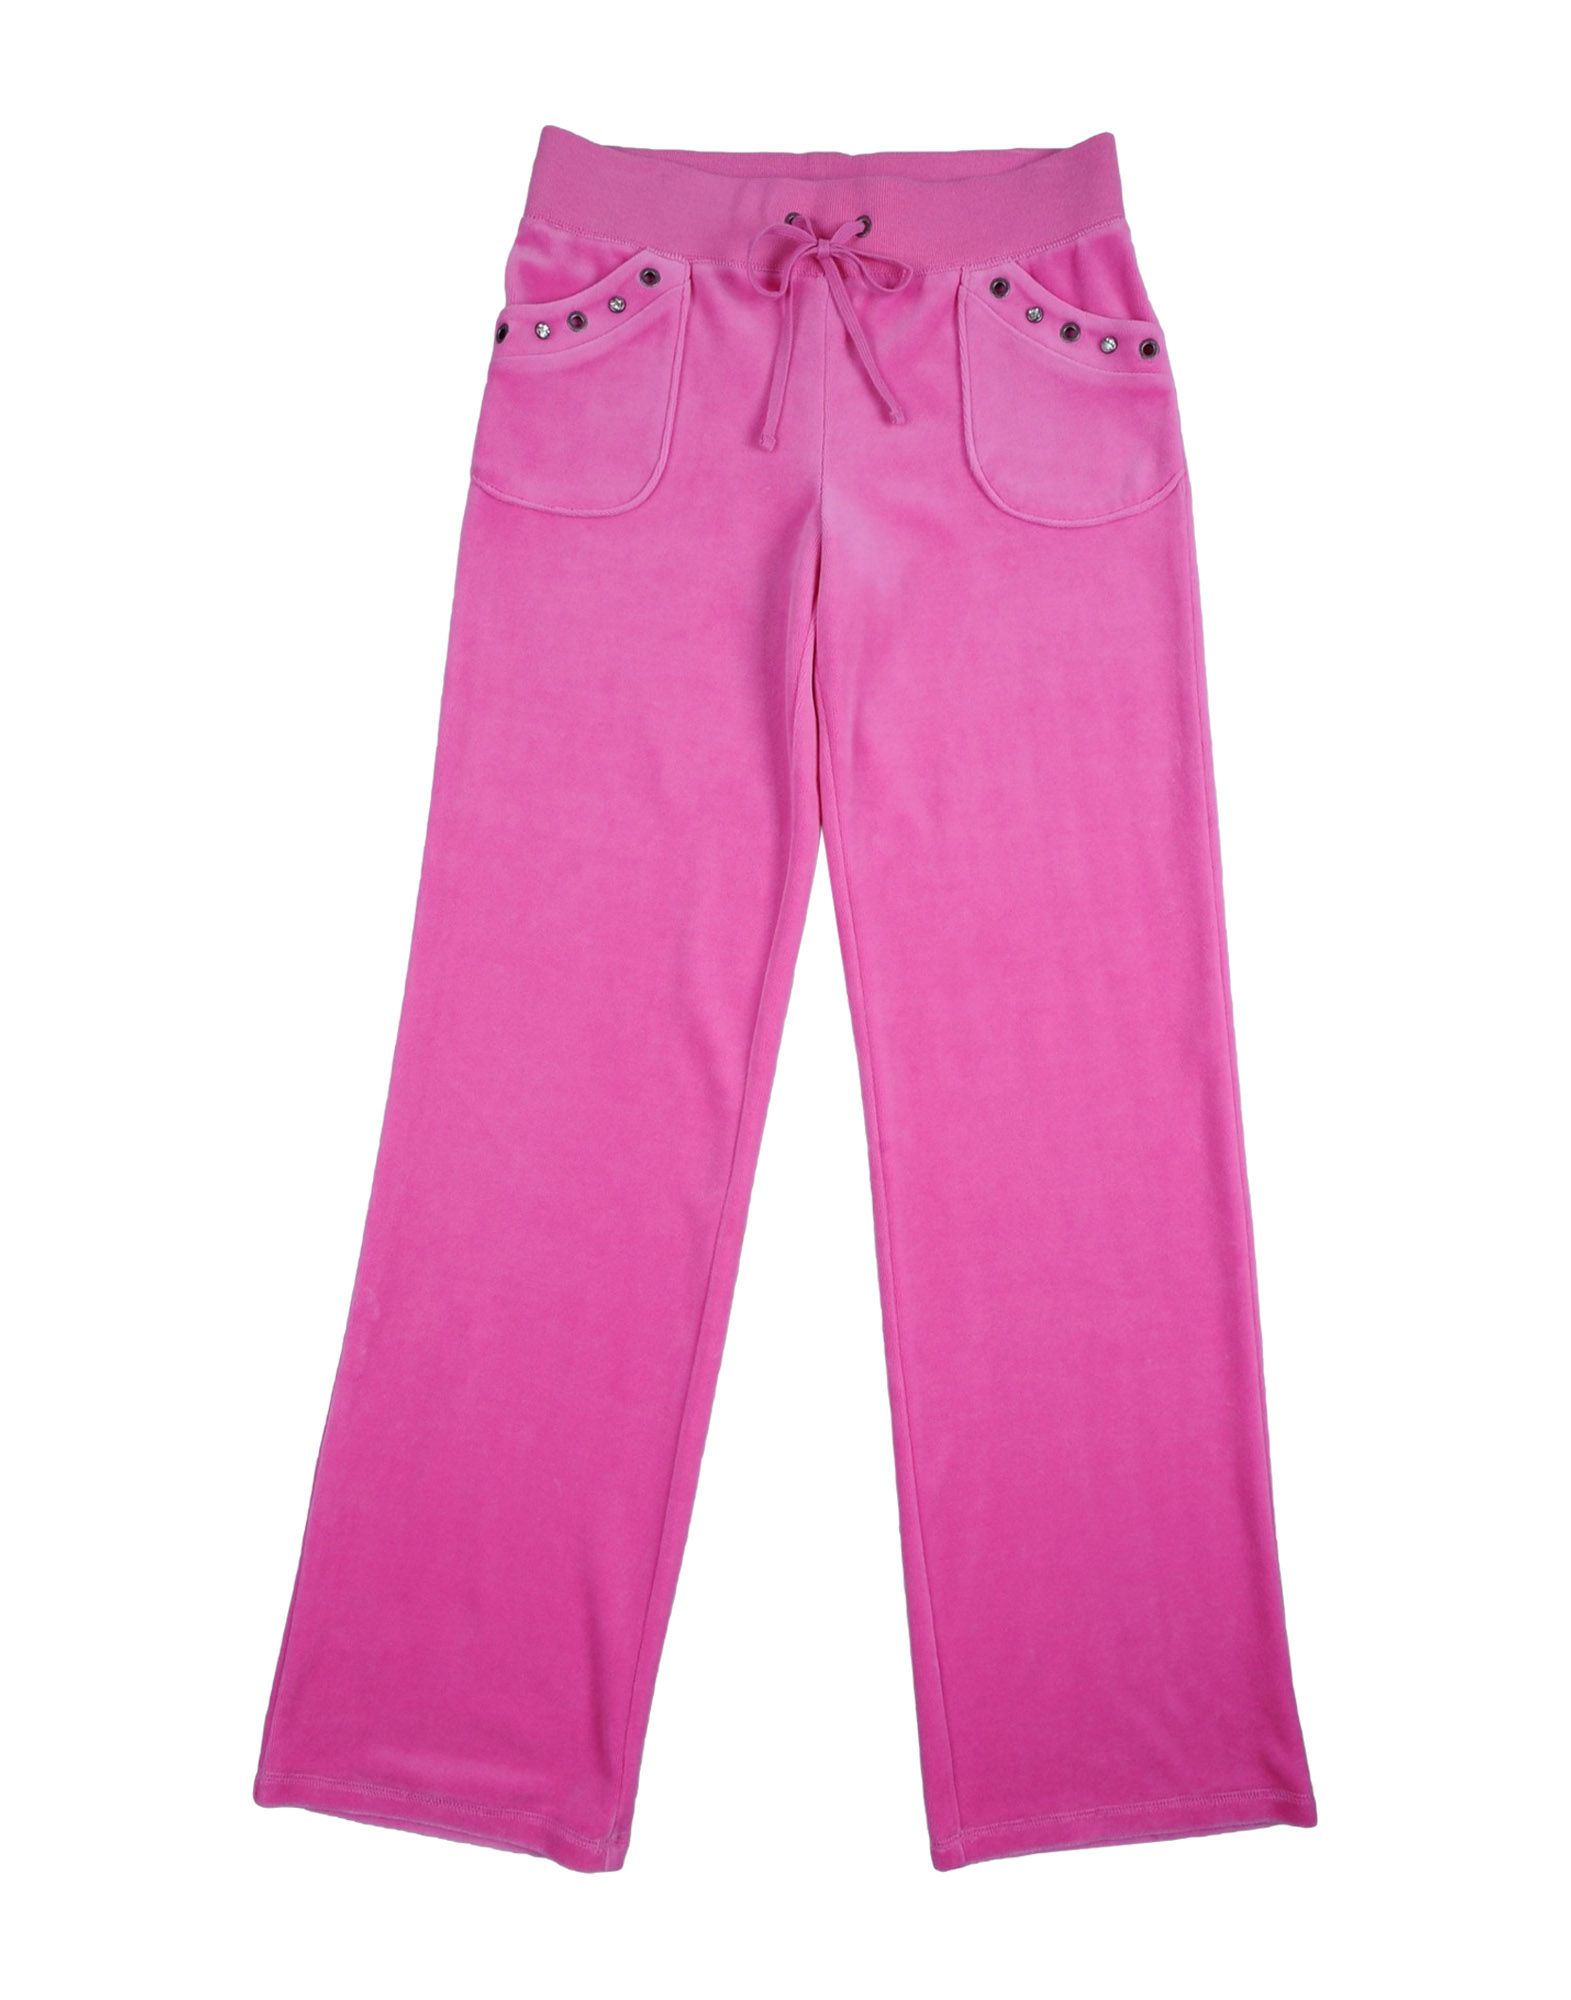 Juicy Couture Sweat Pants in Pink (Fuchsia) | Lyst